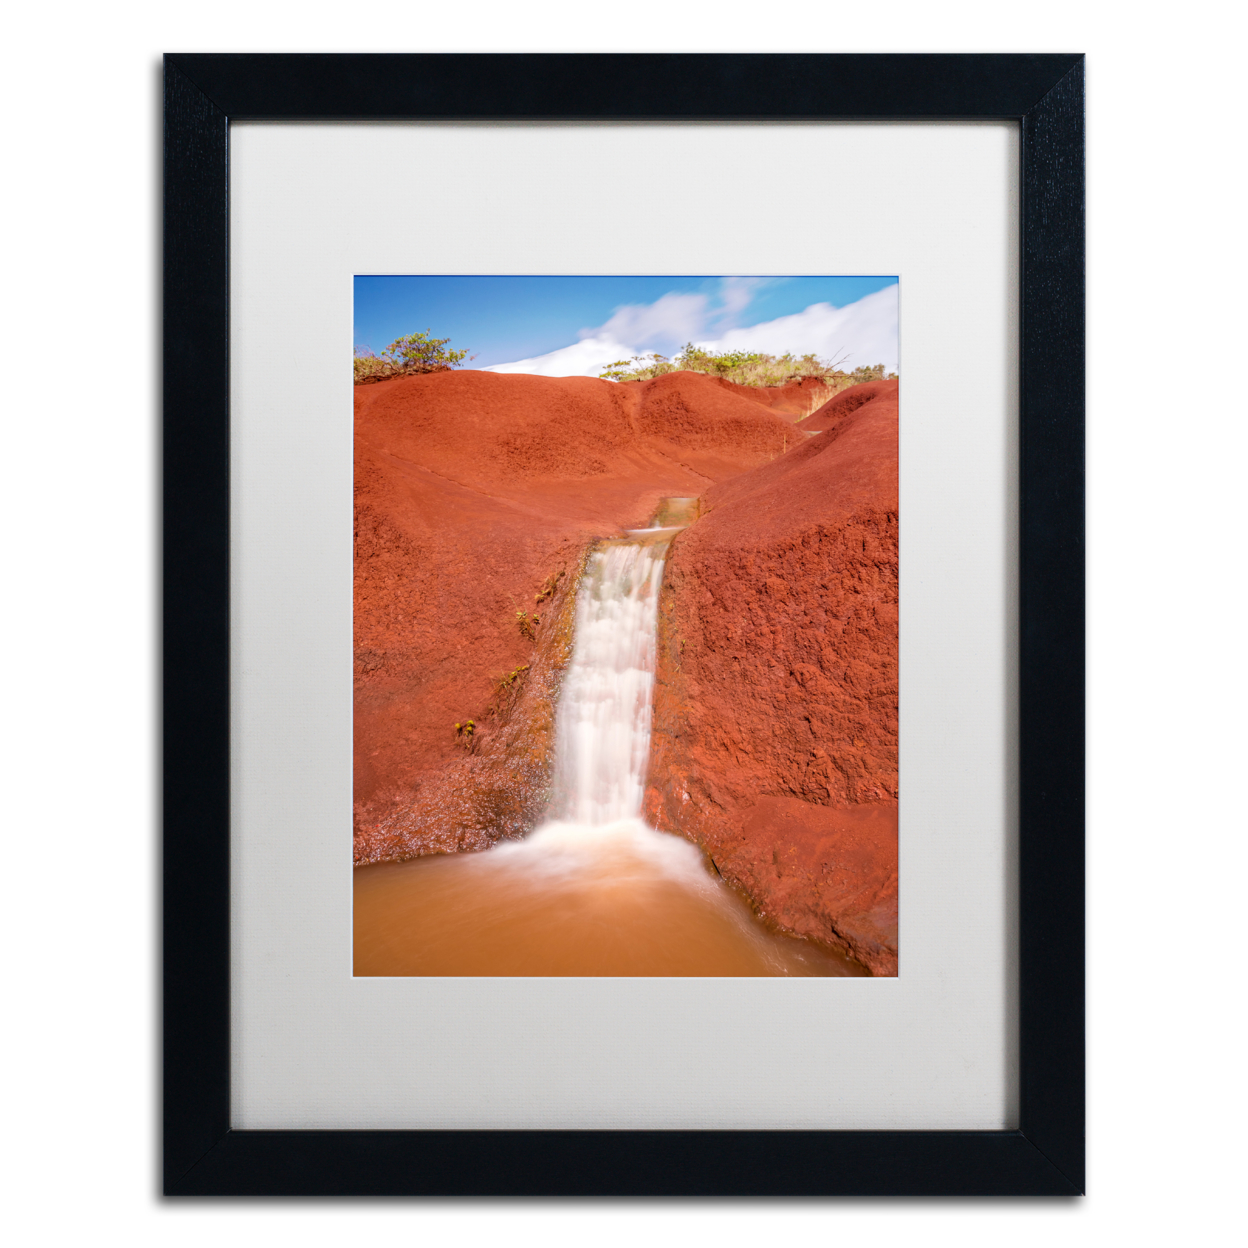 Pierre Leclerc 'Red Dirt Waterfall' Black Wooden Framed Art 18 X 22 Inches